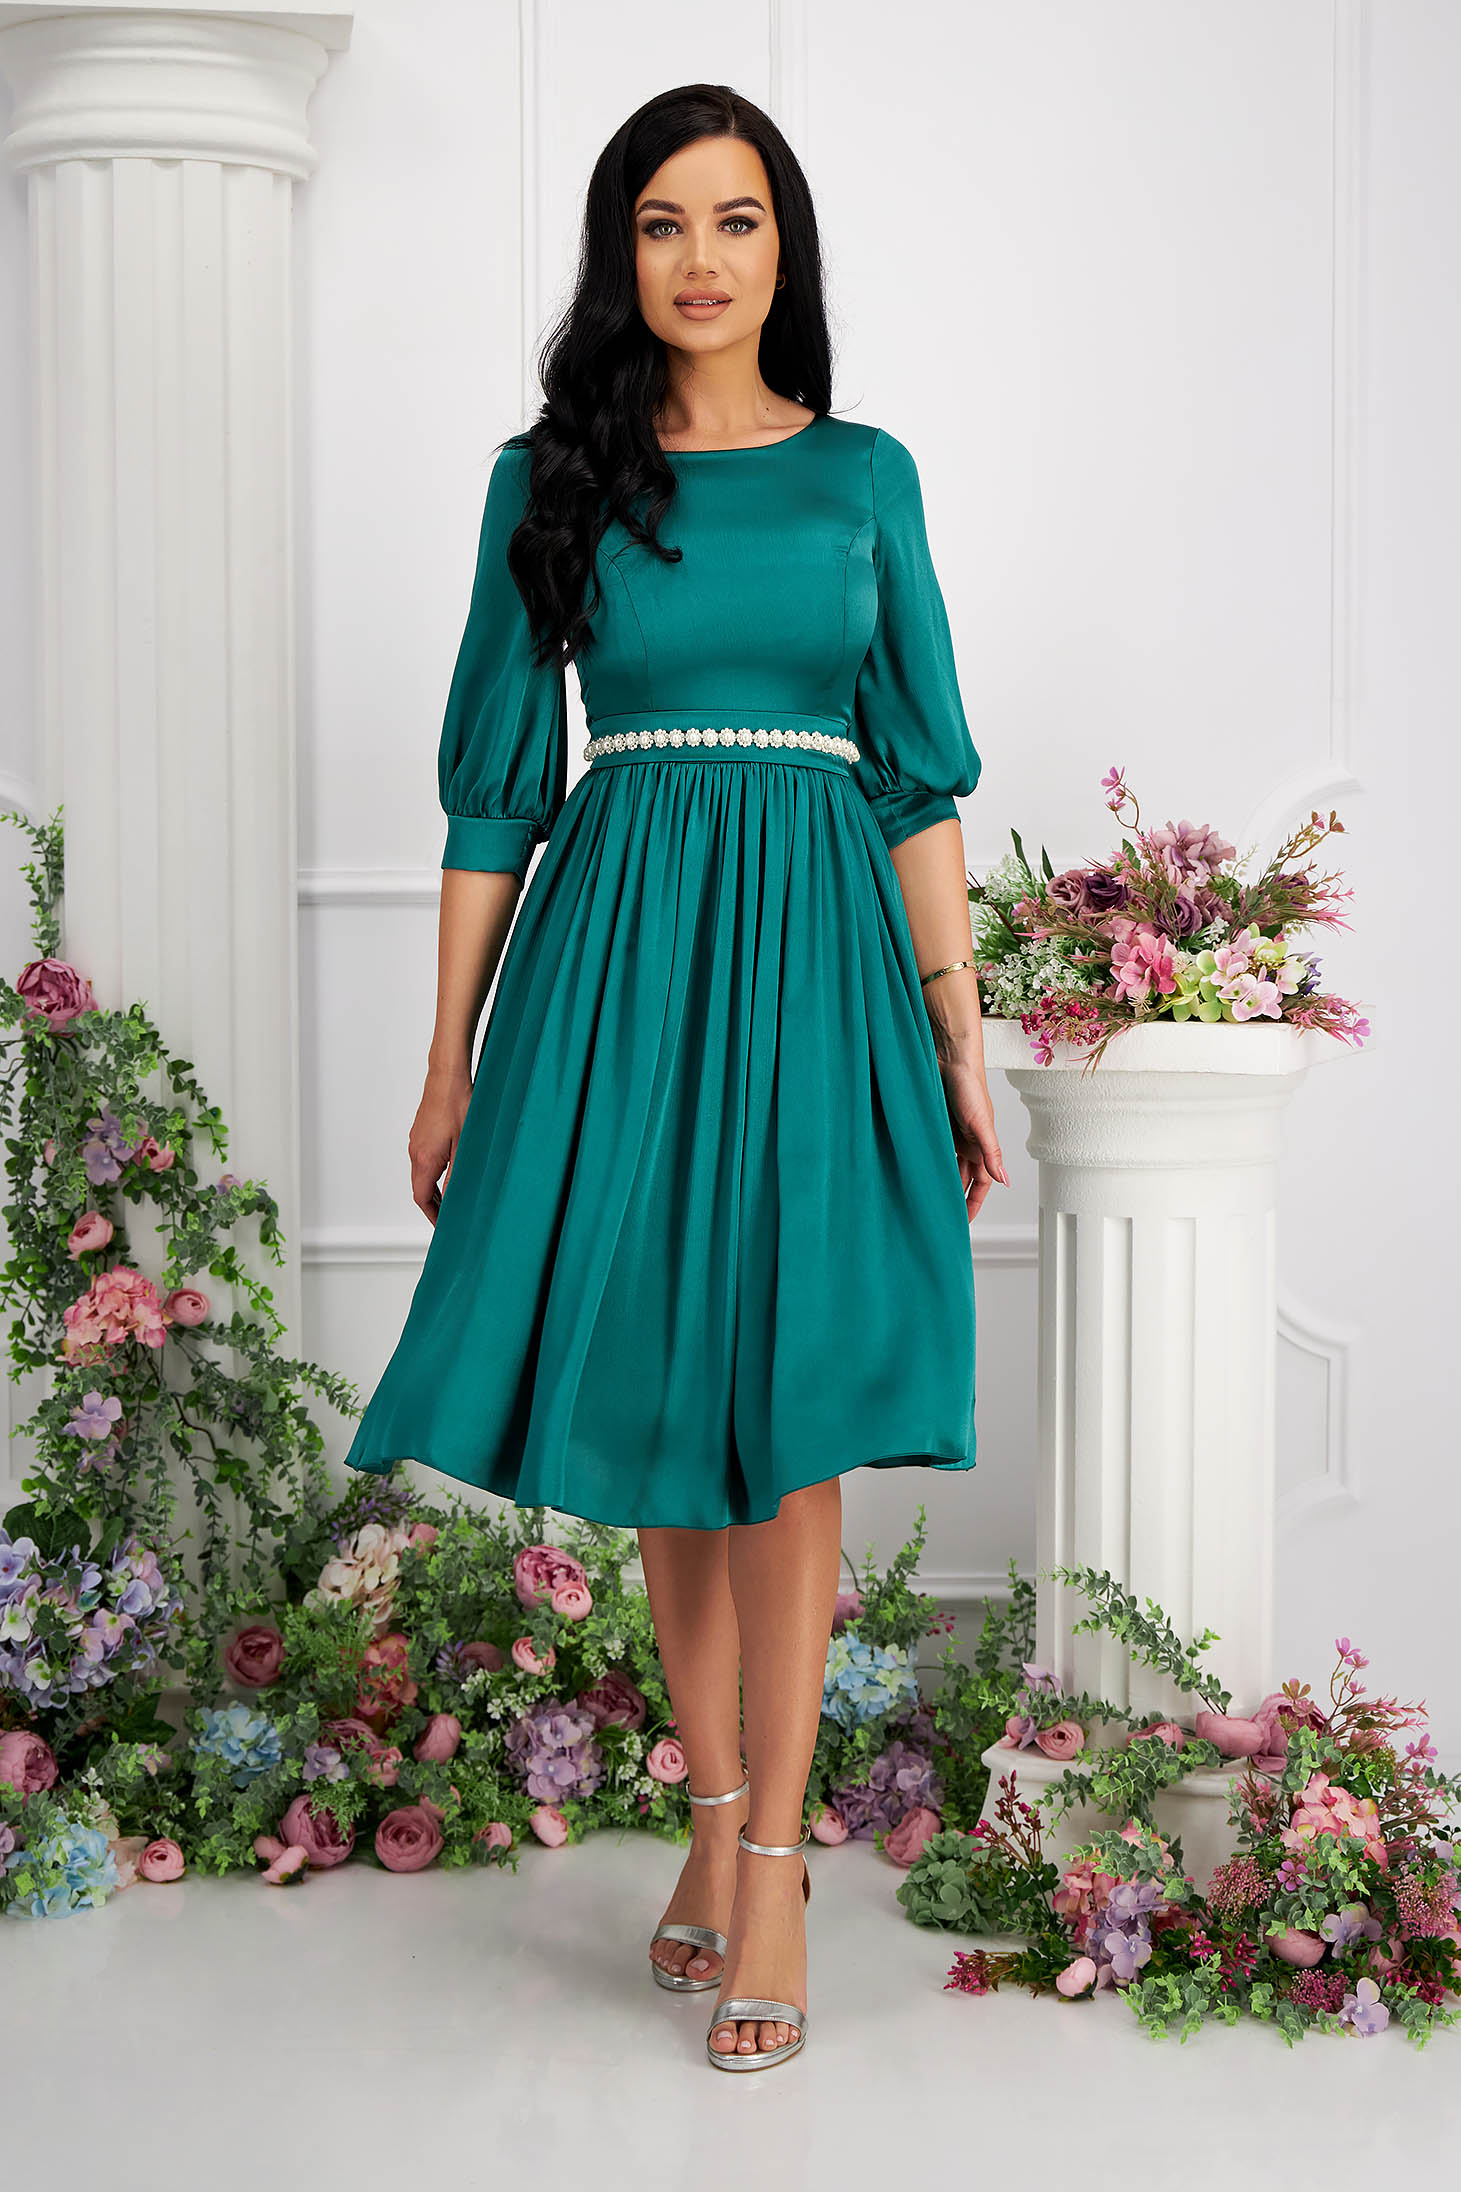 Green Satin Midi Dress in A-line with Pearl Embellishments on Cord - StarShinerS 5 - StarShinerS.com